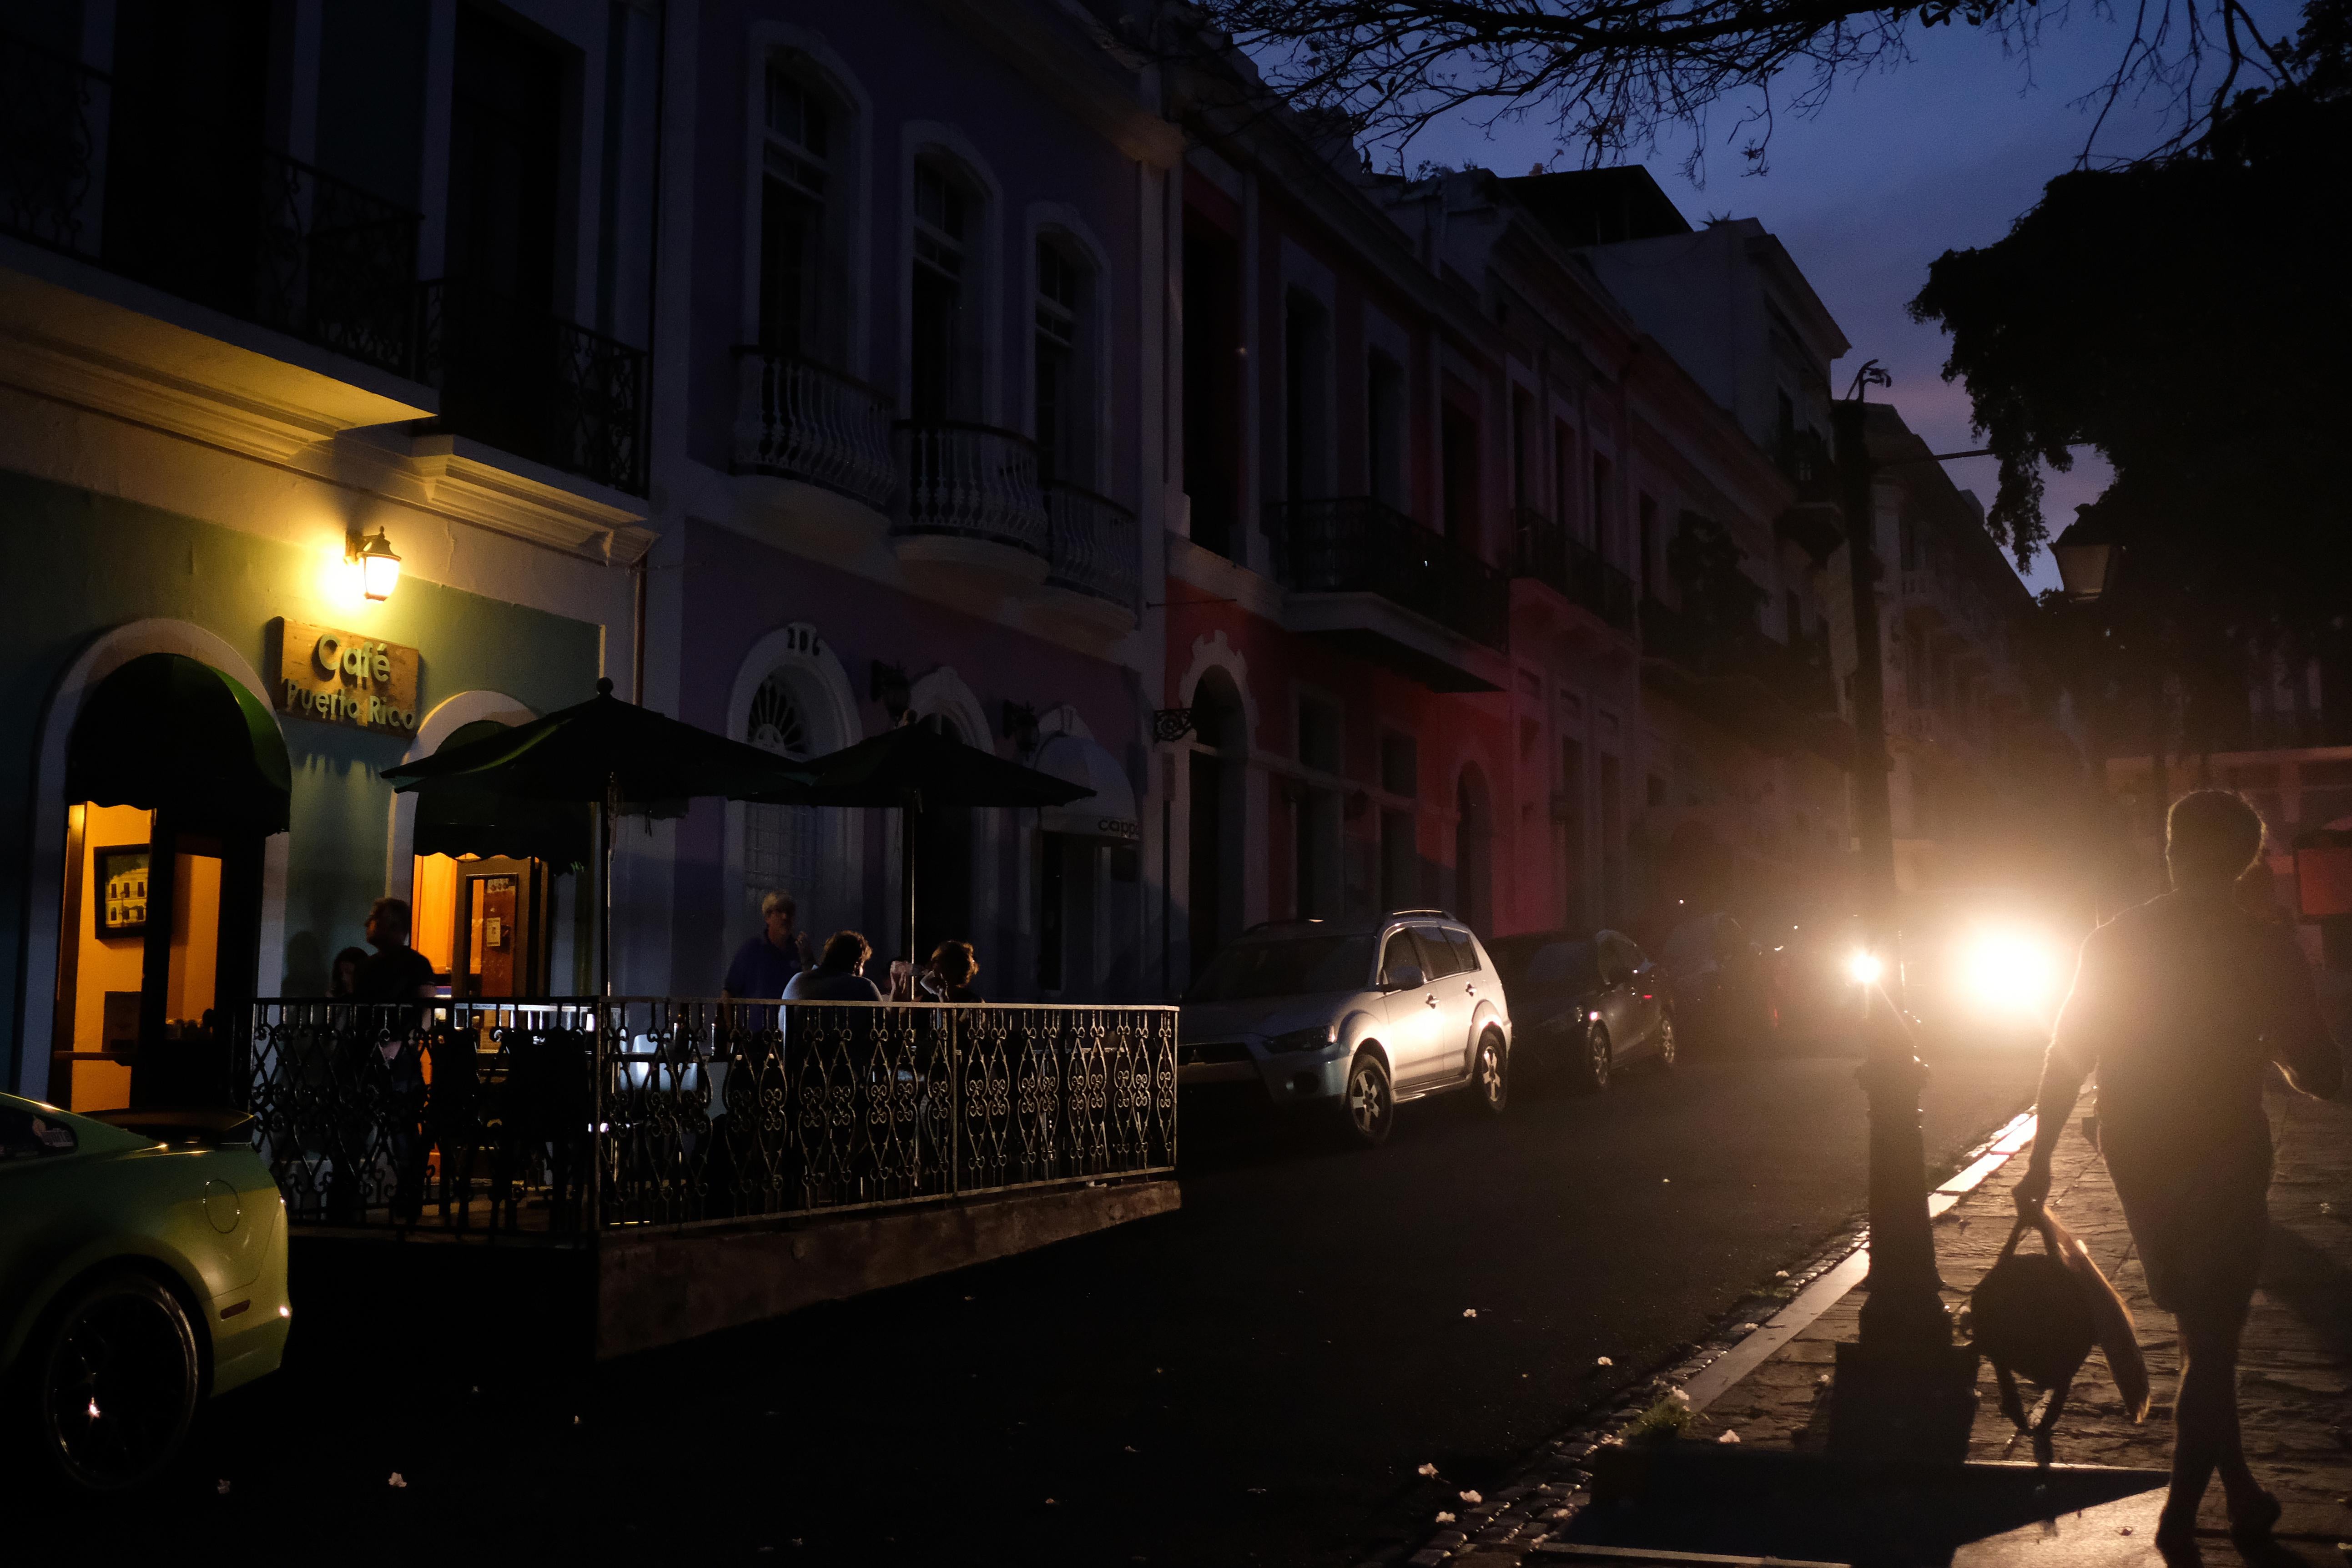 Tourists dine at a darkened sidewalk cafe in Old San Juan, Puerto Rico as a major failure knocked out the electricity in Puerto Rico , leaving the entire island without power nearly seven months after Hurricane Maria destroyed the electrical grid. 